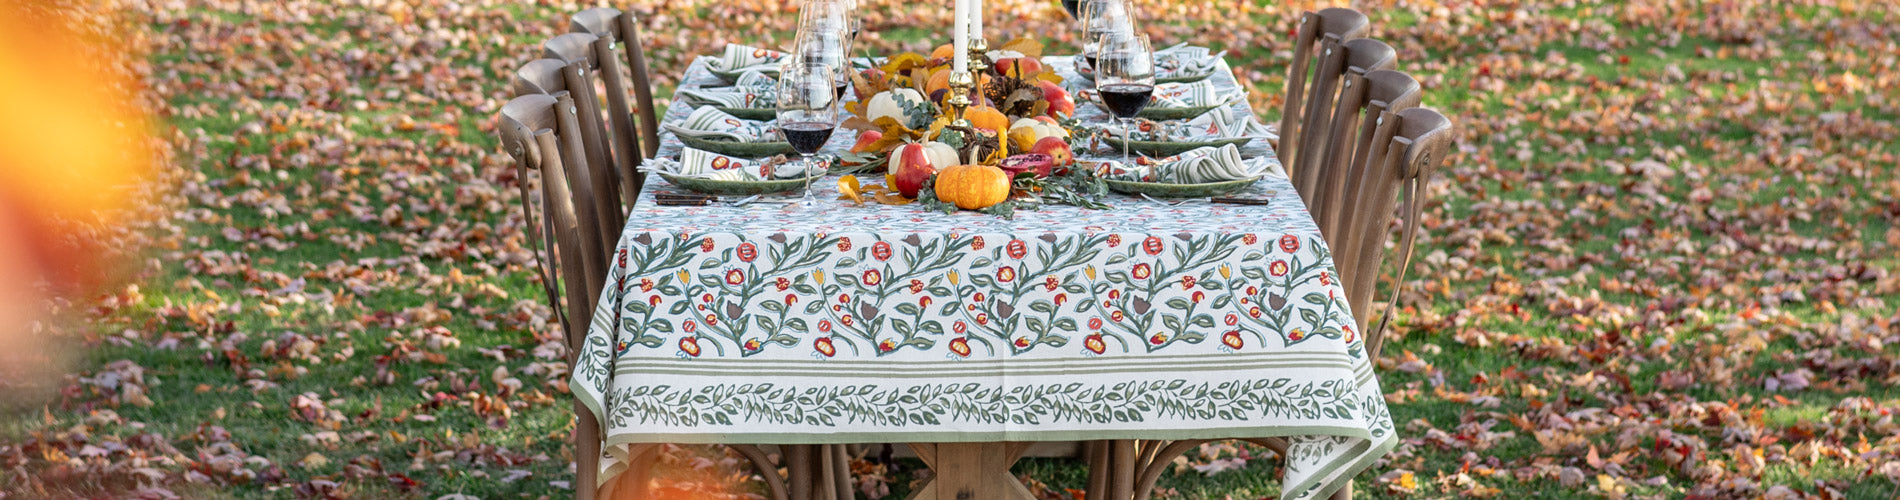 Fall Floral Table Linens | Pomegranate Inc